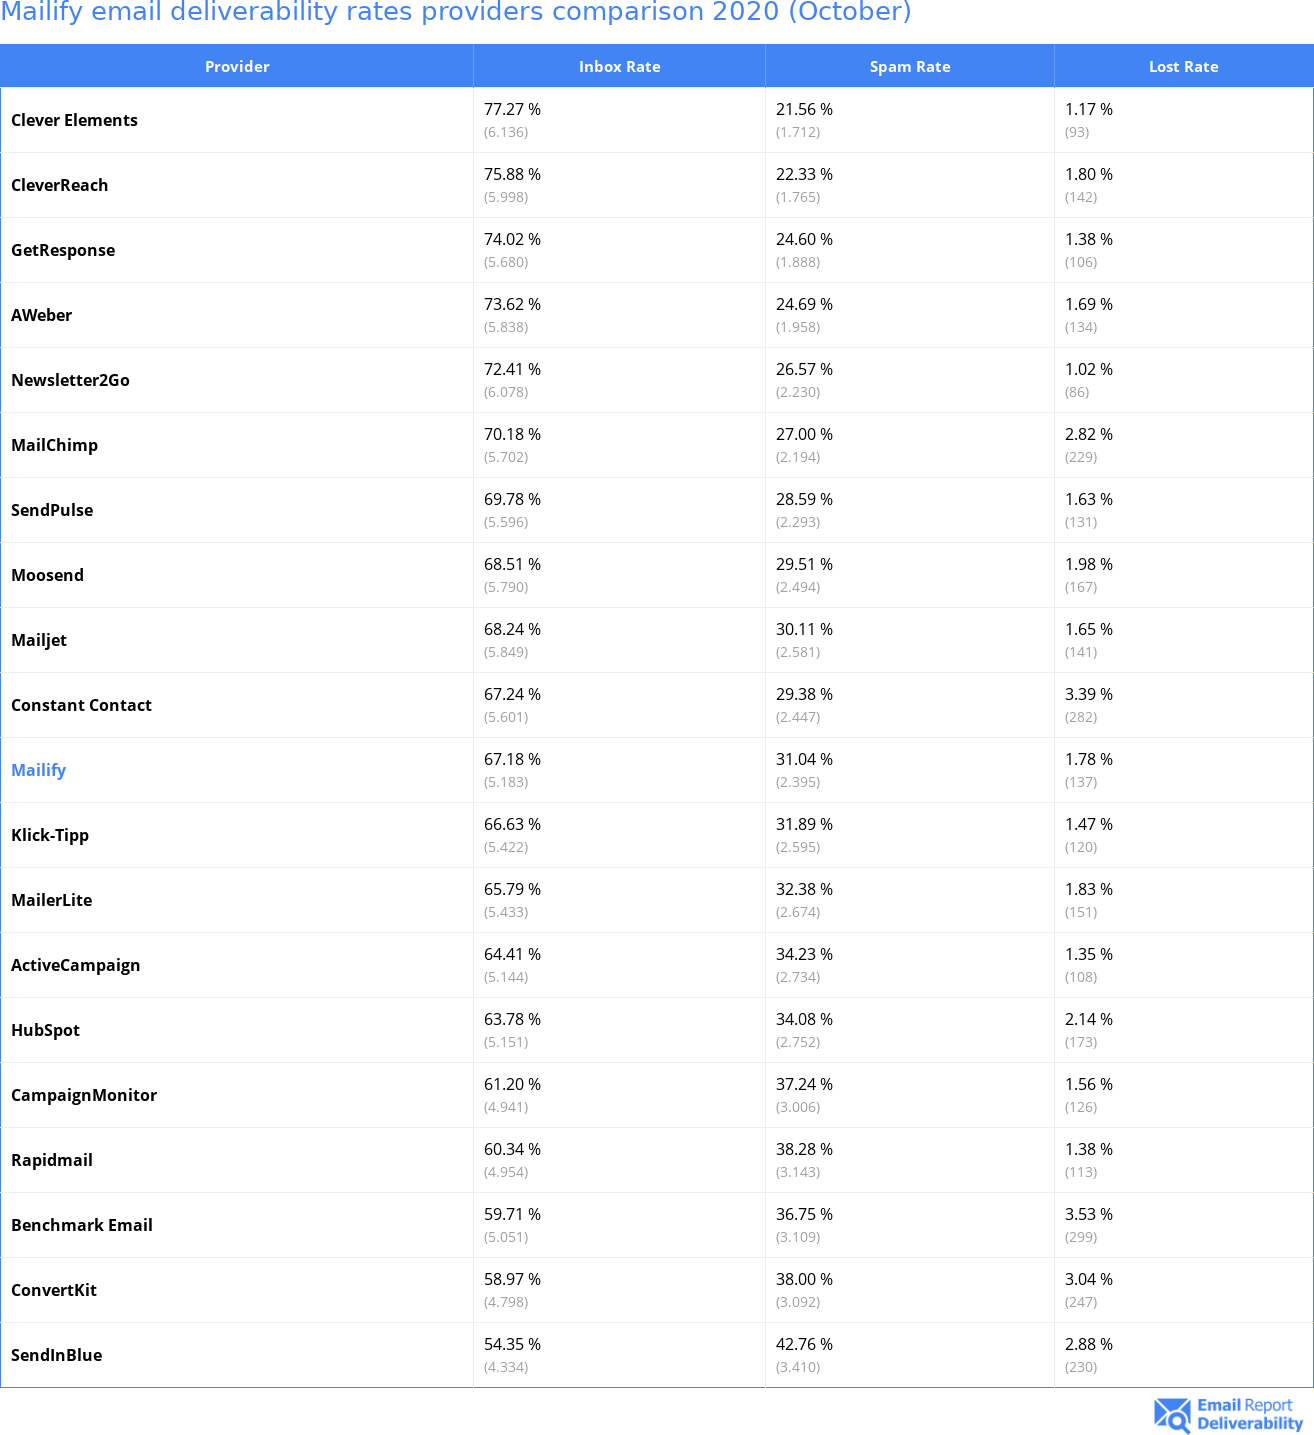 Mailify email deliverability rates providers comparison 2020 (October)